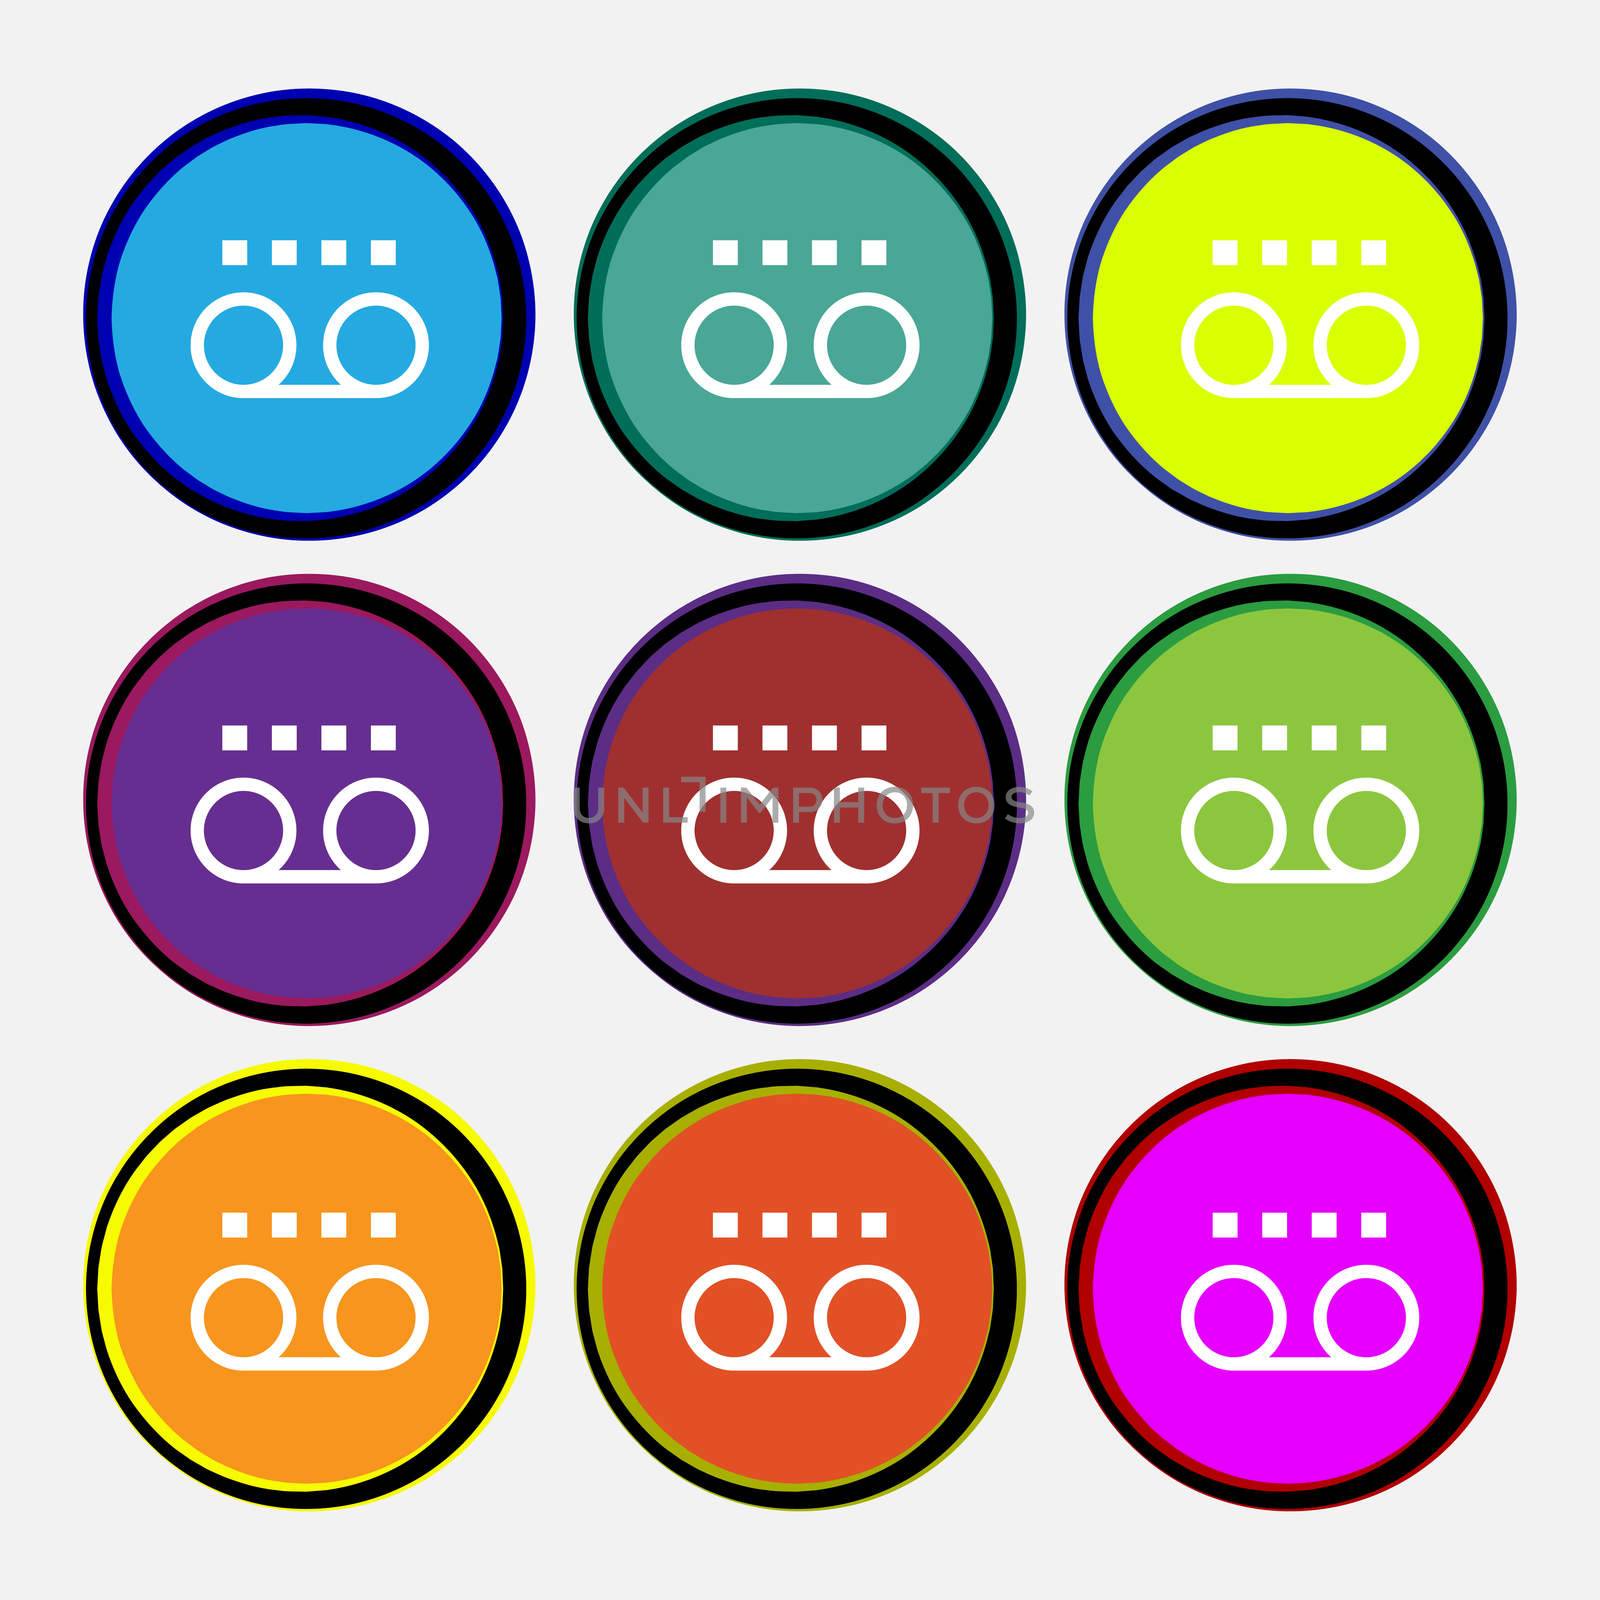 audio cassette icon sign. Nine multi colored round buttons. illustration